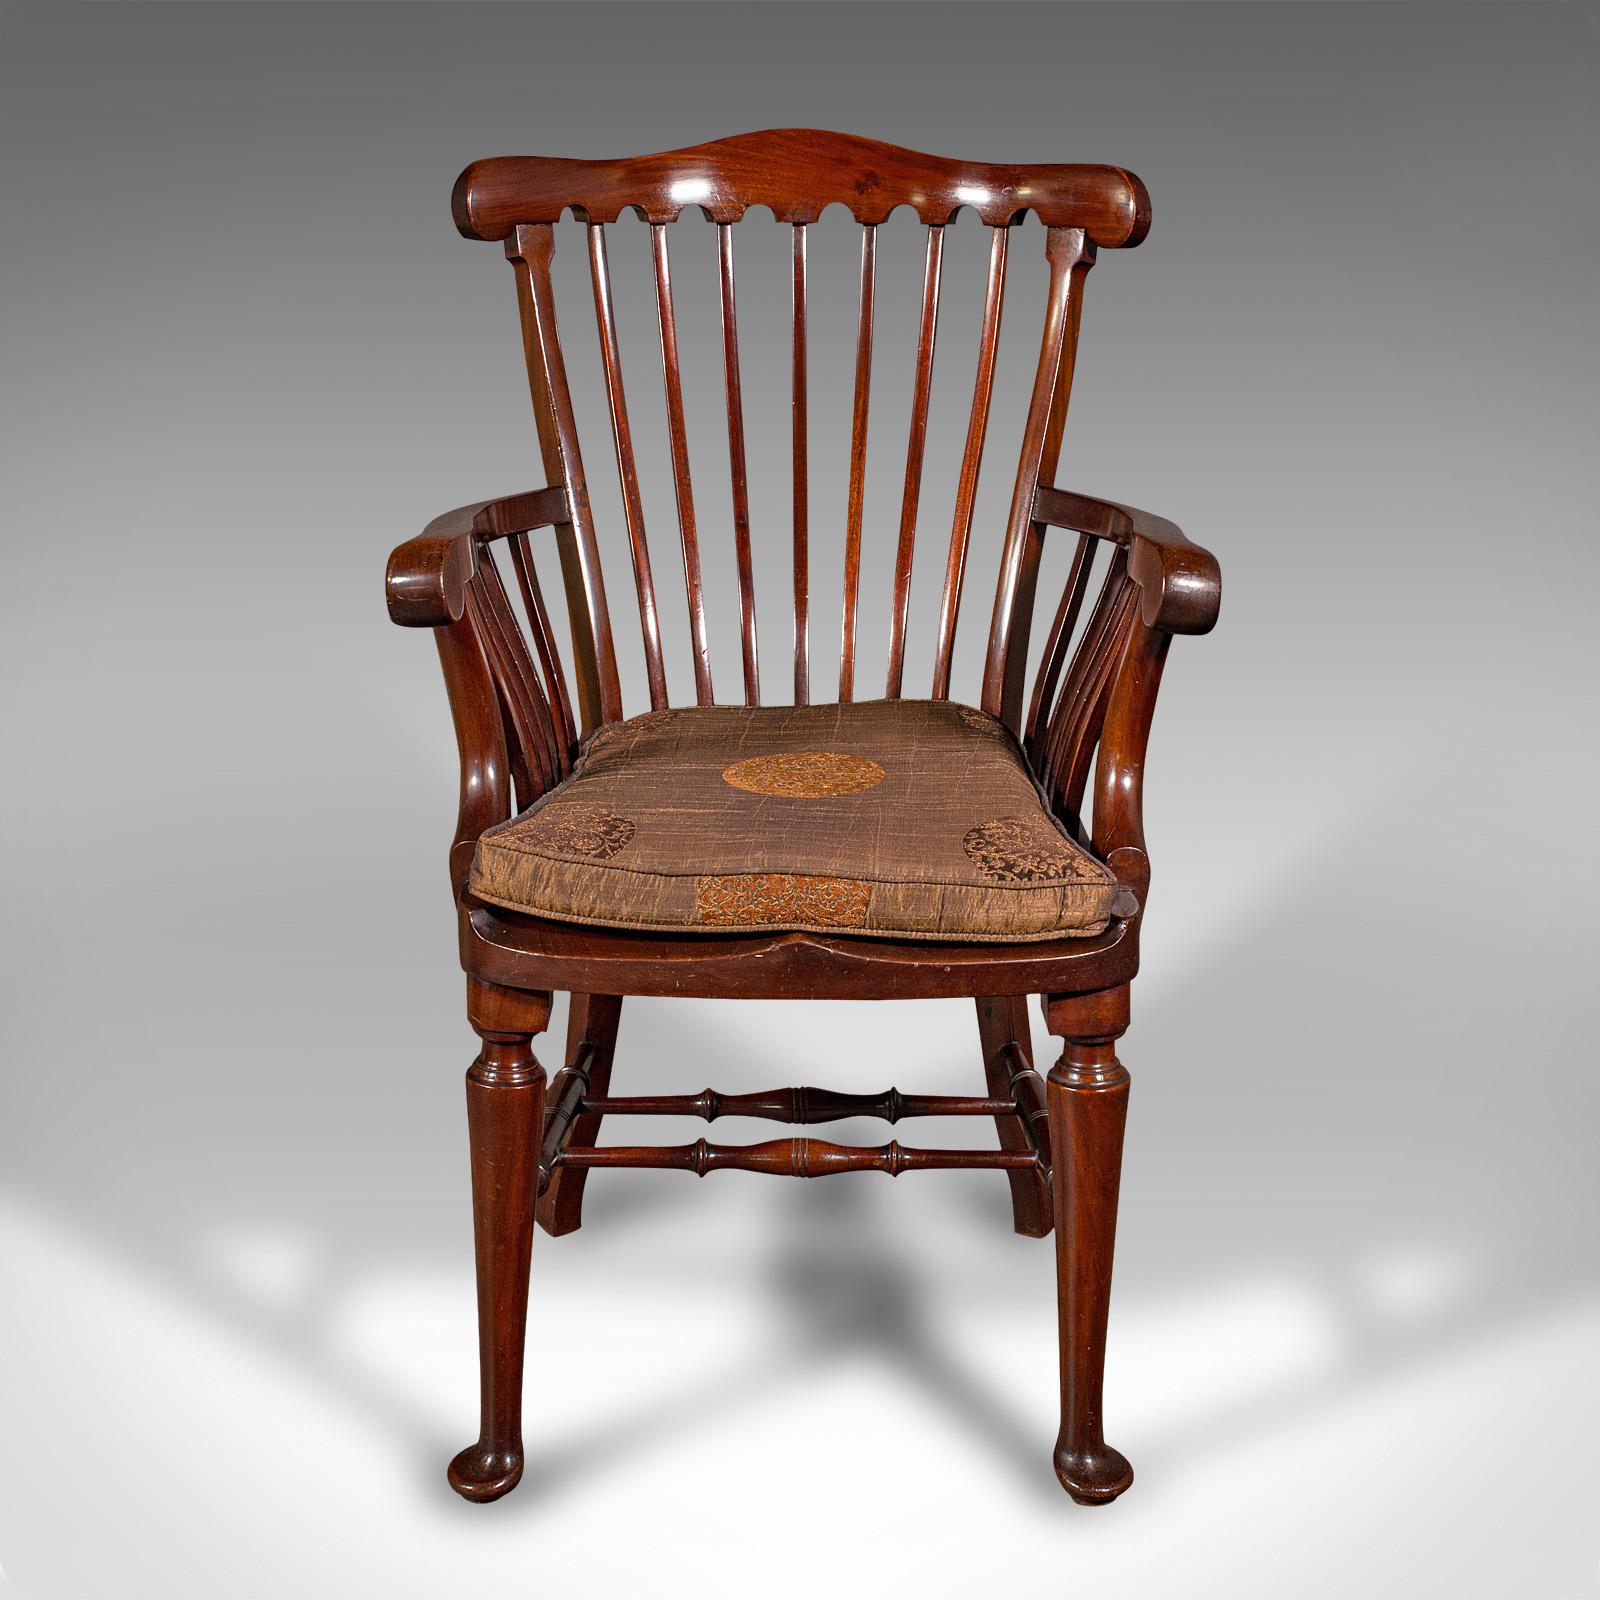 This is an antique cleric's armchair. An English, mahogany and beech open elbow chair in Georgian revival taste, dating to the late Victorian period, circa 1890.

Elegantly crafted armchair with an attractive finish and colour
Displays a desirable